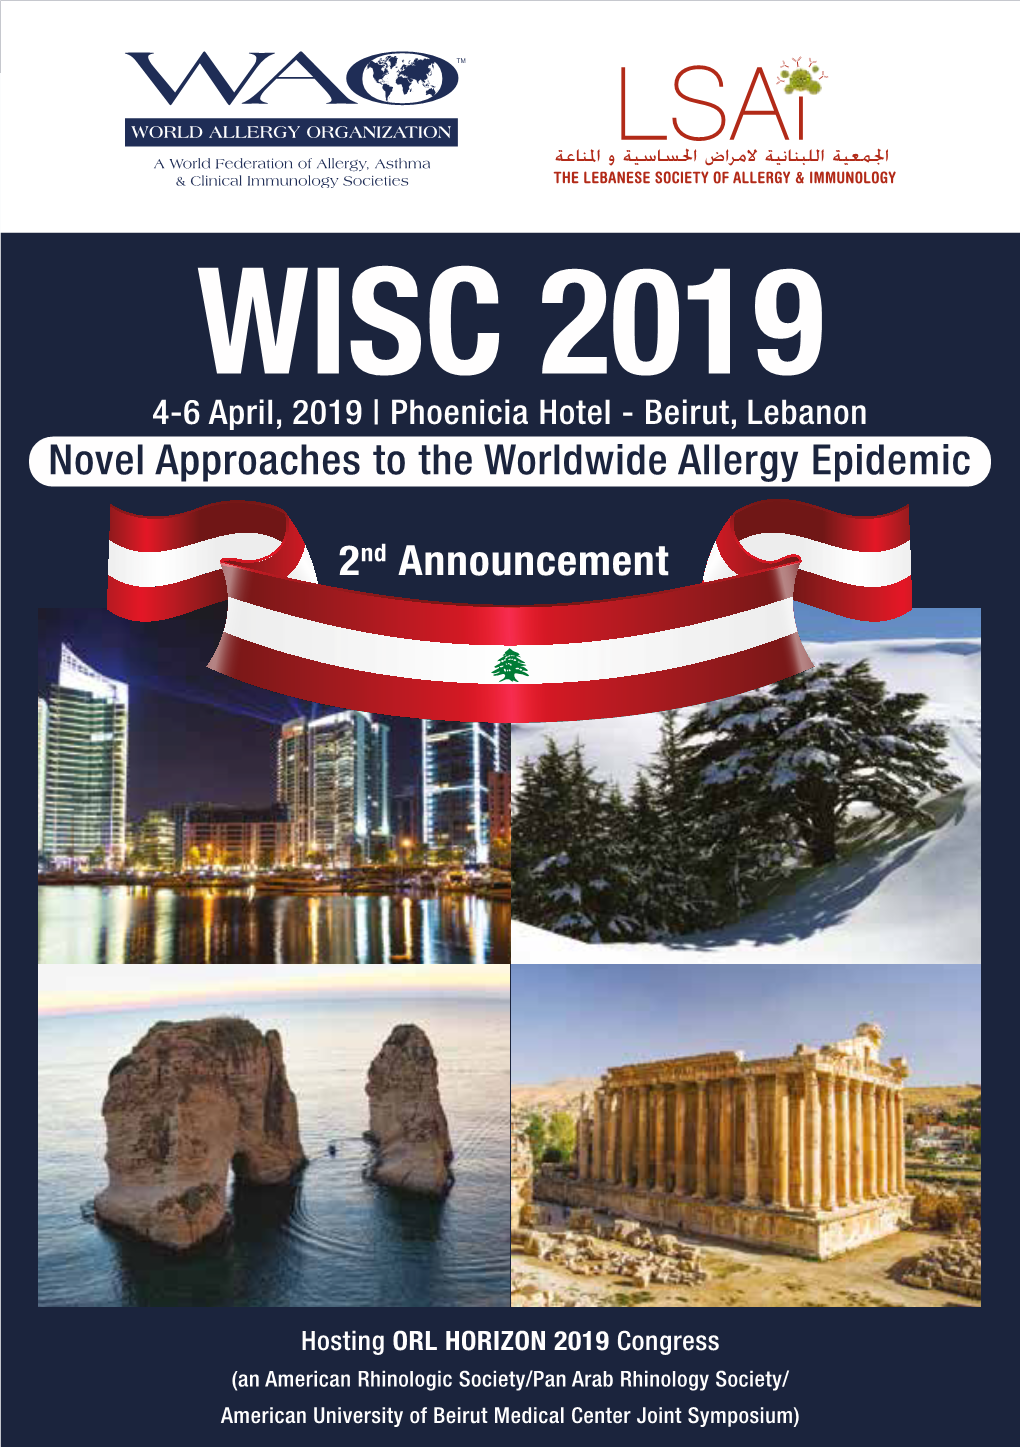 WISC 2019 4-6 April, 2019 | Phoenicia Hotel - Beirut, Lebanon Novel Approaches to the Worldwide Allergy Epidemic